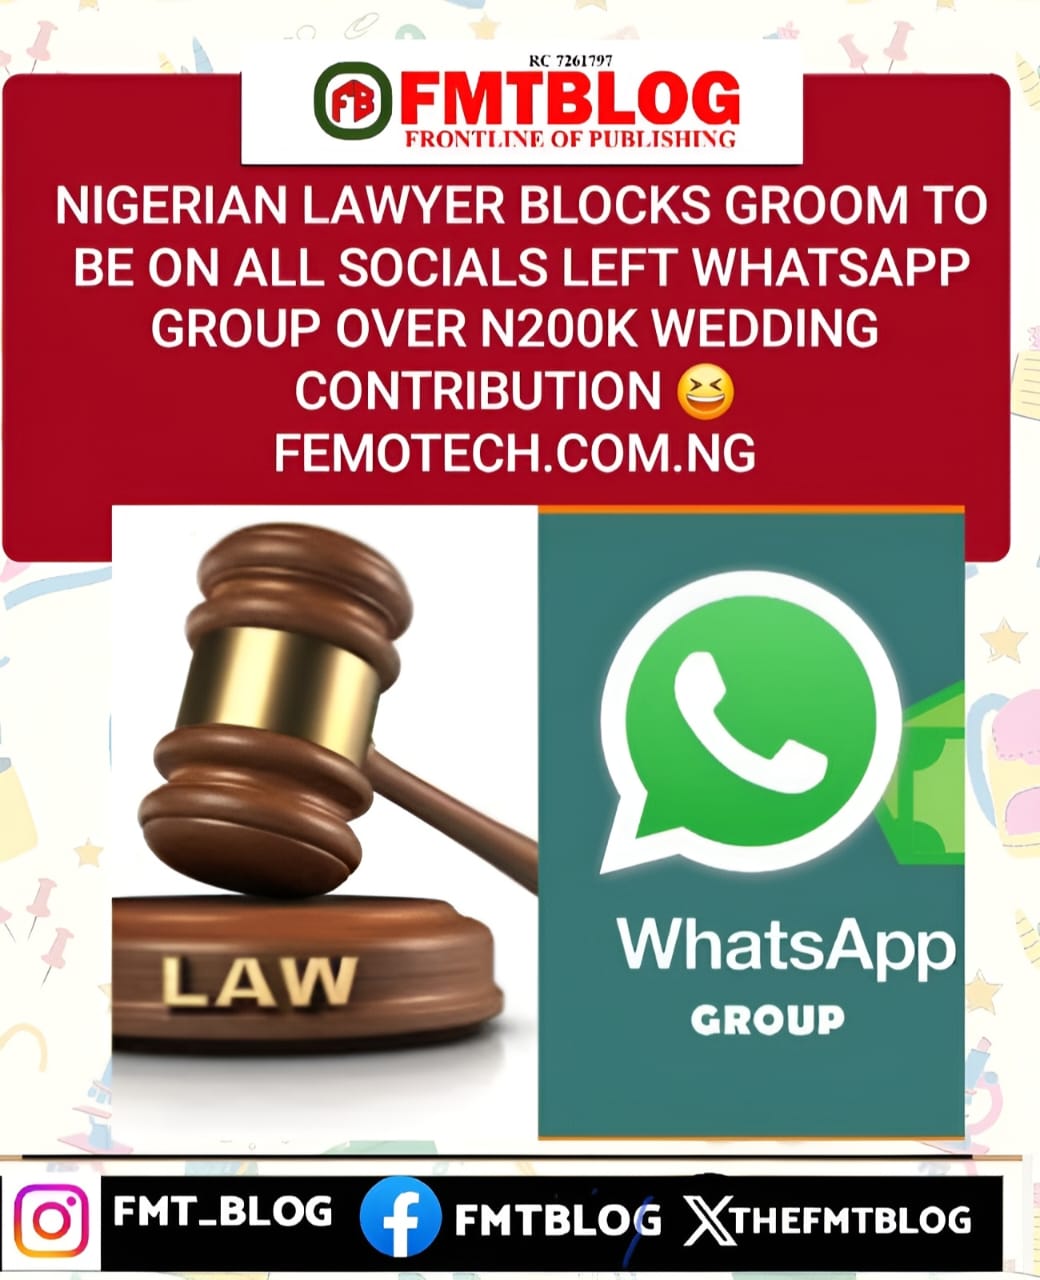 Nigerian Lawyer Blocks Groom To Be On All Socials, Left WhatsApp Group Over N200K Wedding Contribution?